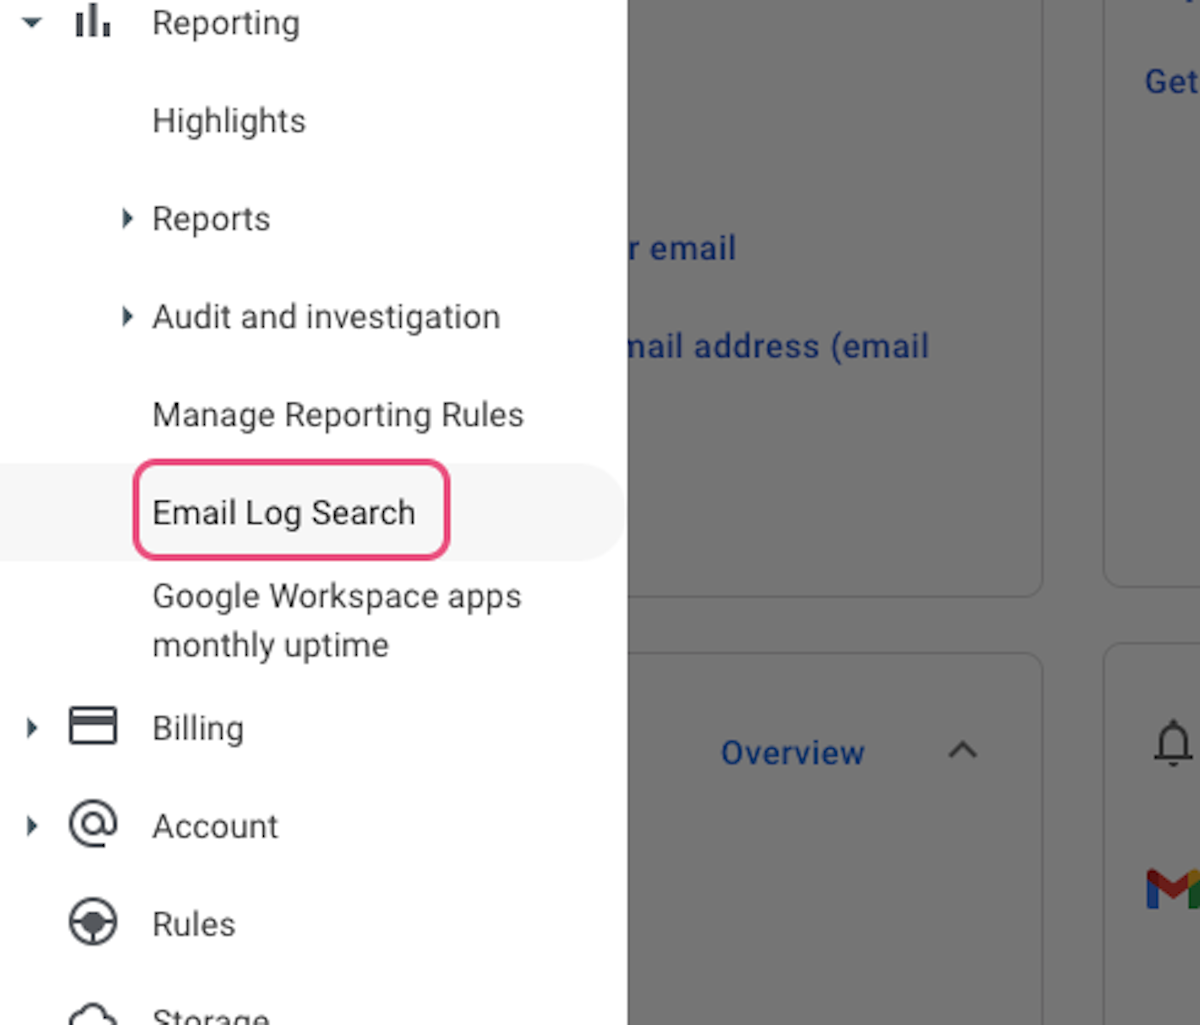 Click on Email Log Search